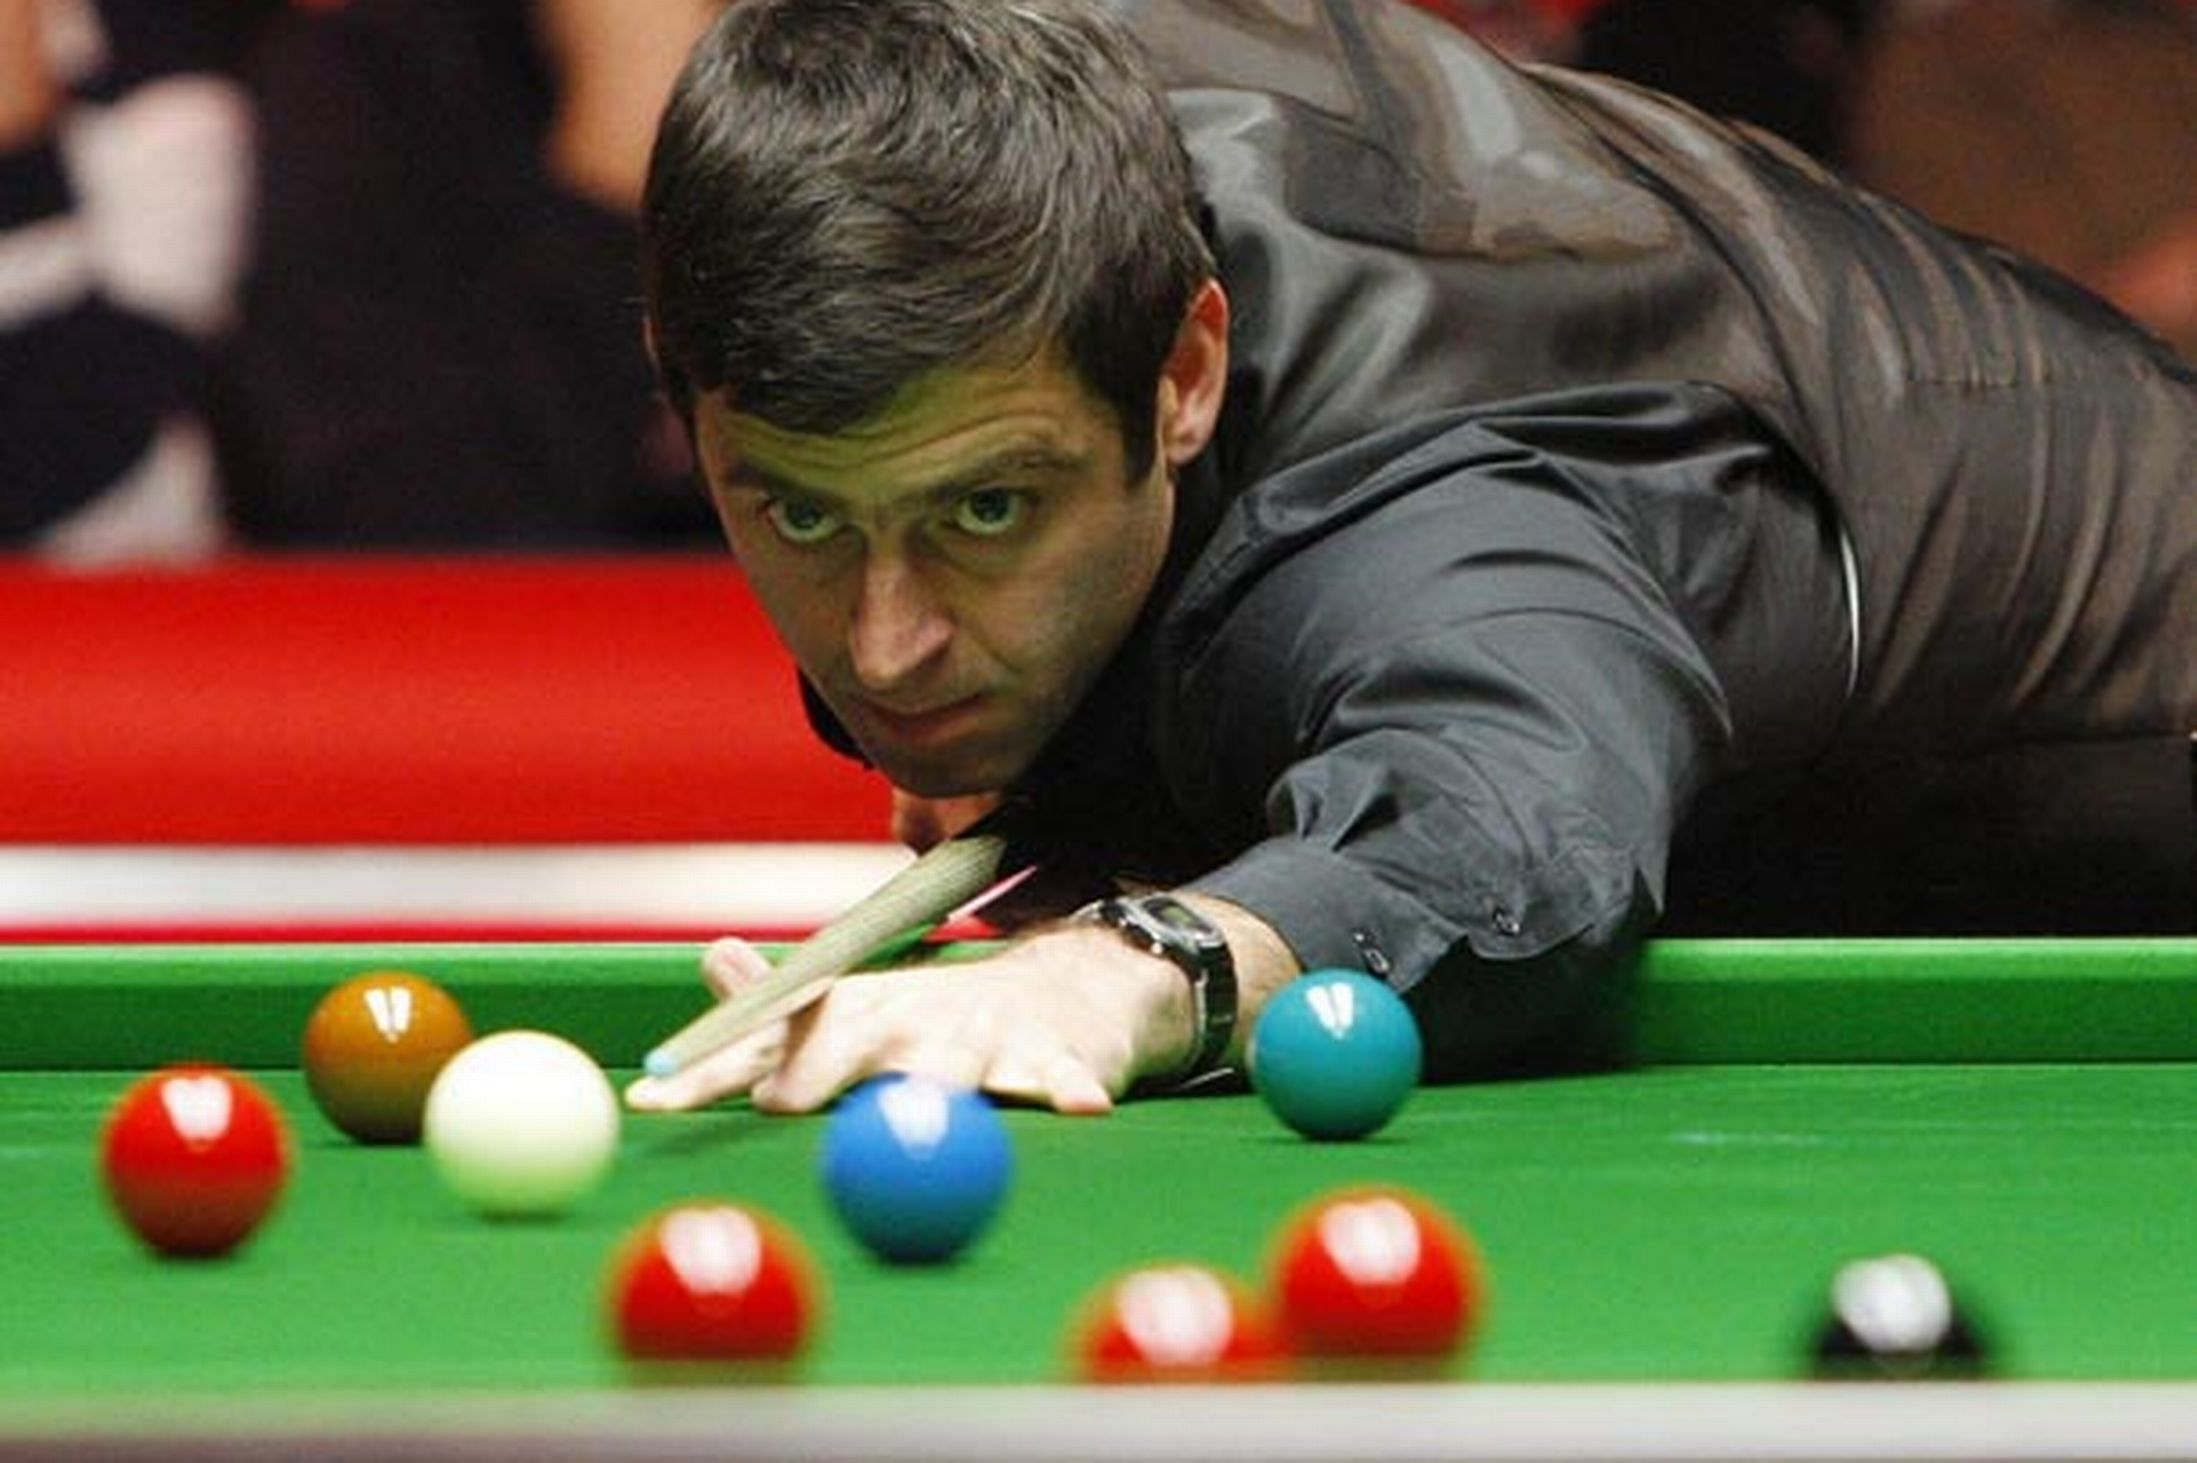 Ronnie OSullivan sets new tons record, enters snooker Masters semis